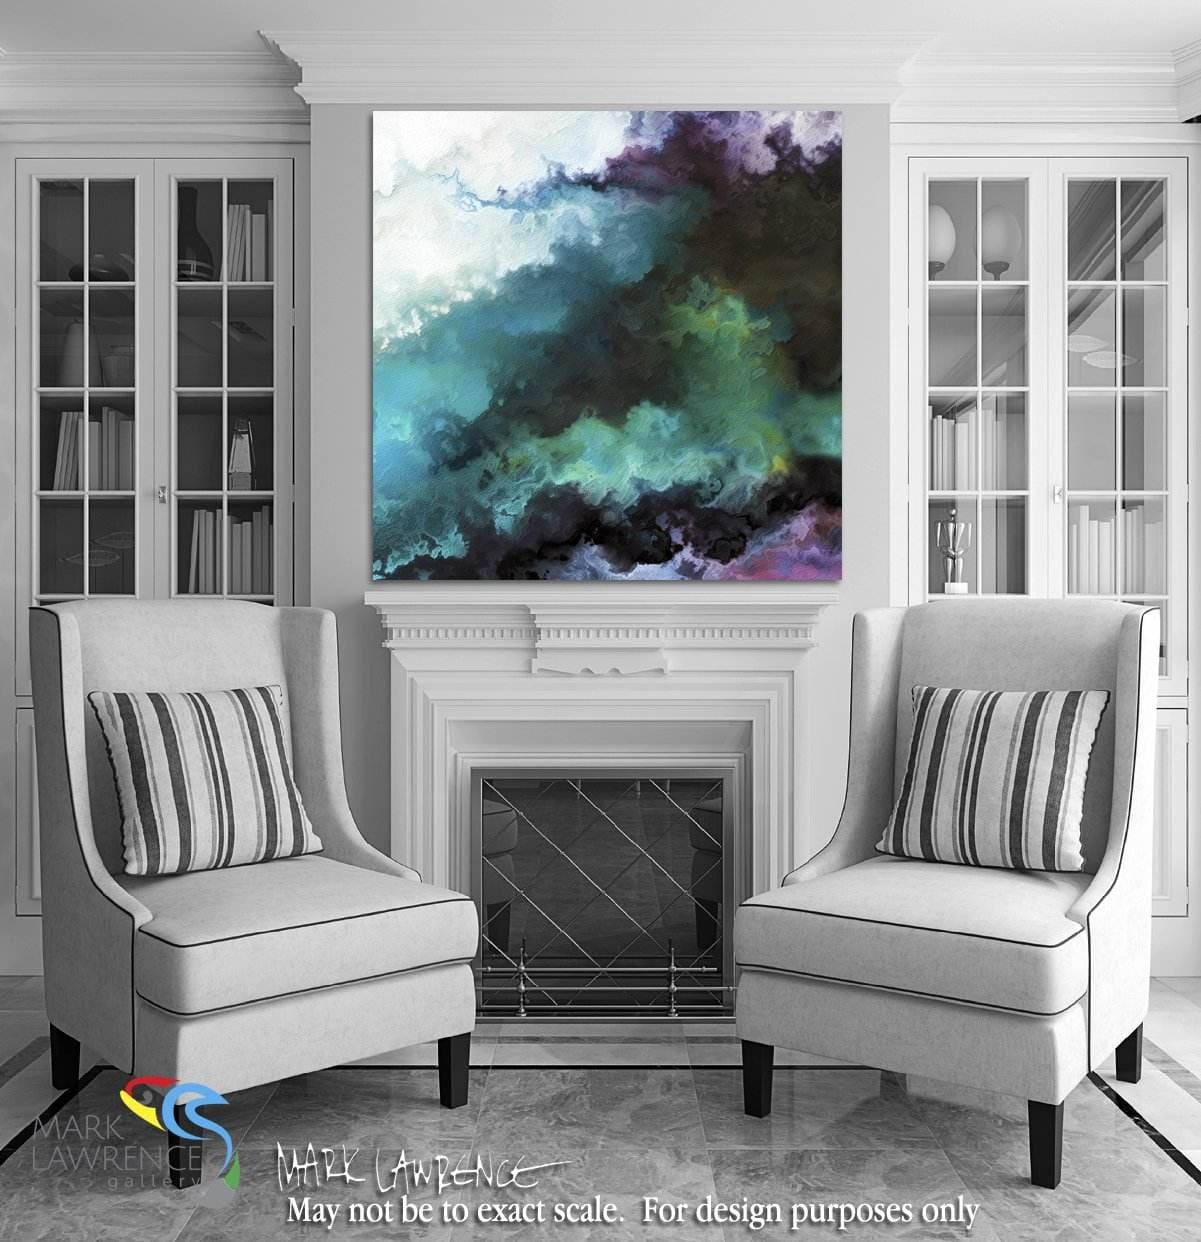 Exodus 14:14. The Lord Shall Fight For You. Christian themed limited edition art. Ultra-hand textured and embellished with brush strokes by the artist. Signed and numbered modern abstracts. Share your faith with art! The Lord shall fight for you, and ye shall hold your peace.